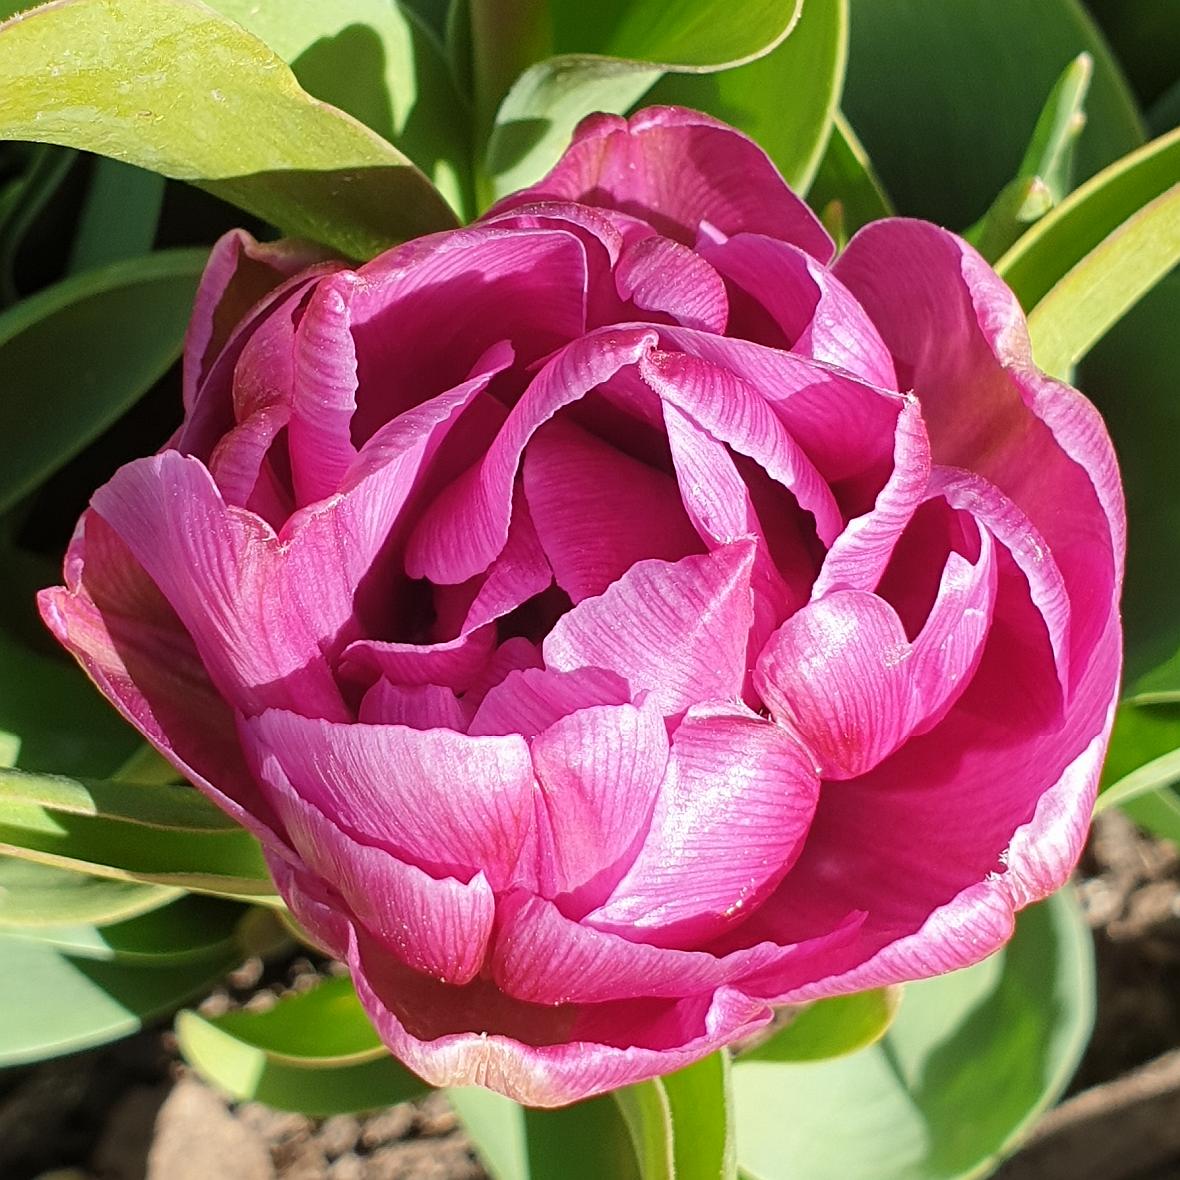 Good morning all, Happy Monday👏
Stay safe, have a Great Day and keep smiling, 😊
My flower for today is a Double Tulip.
#MagentaMonday #GardeningTwitter #Flowers